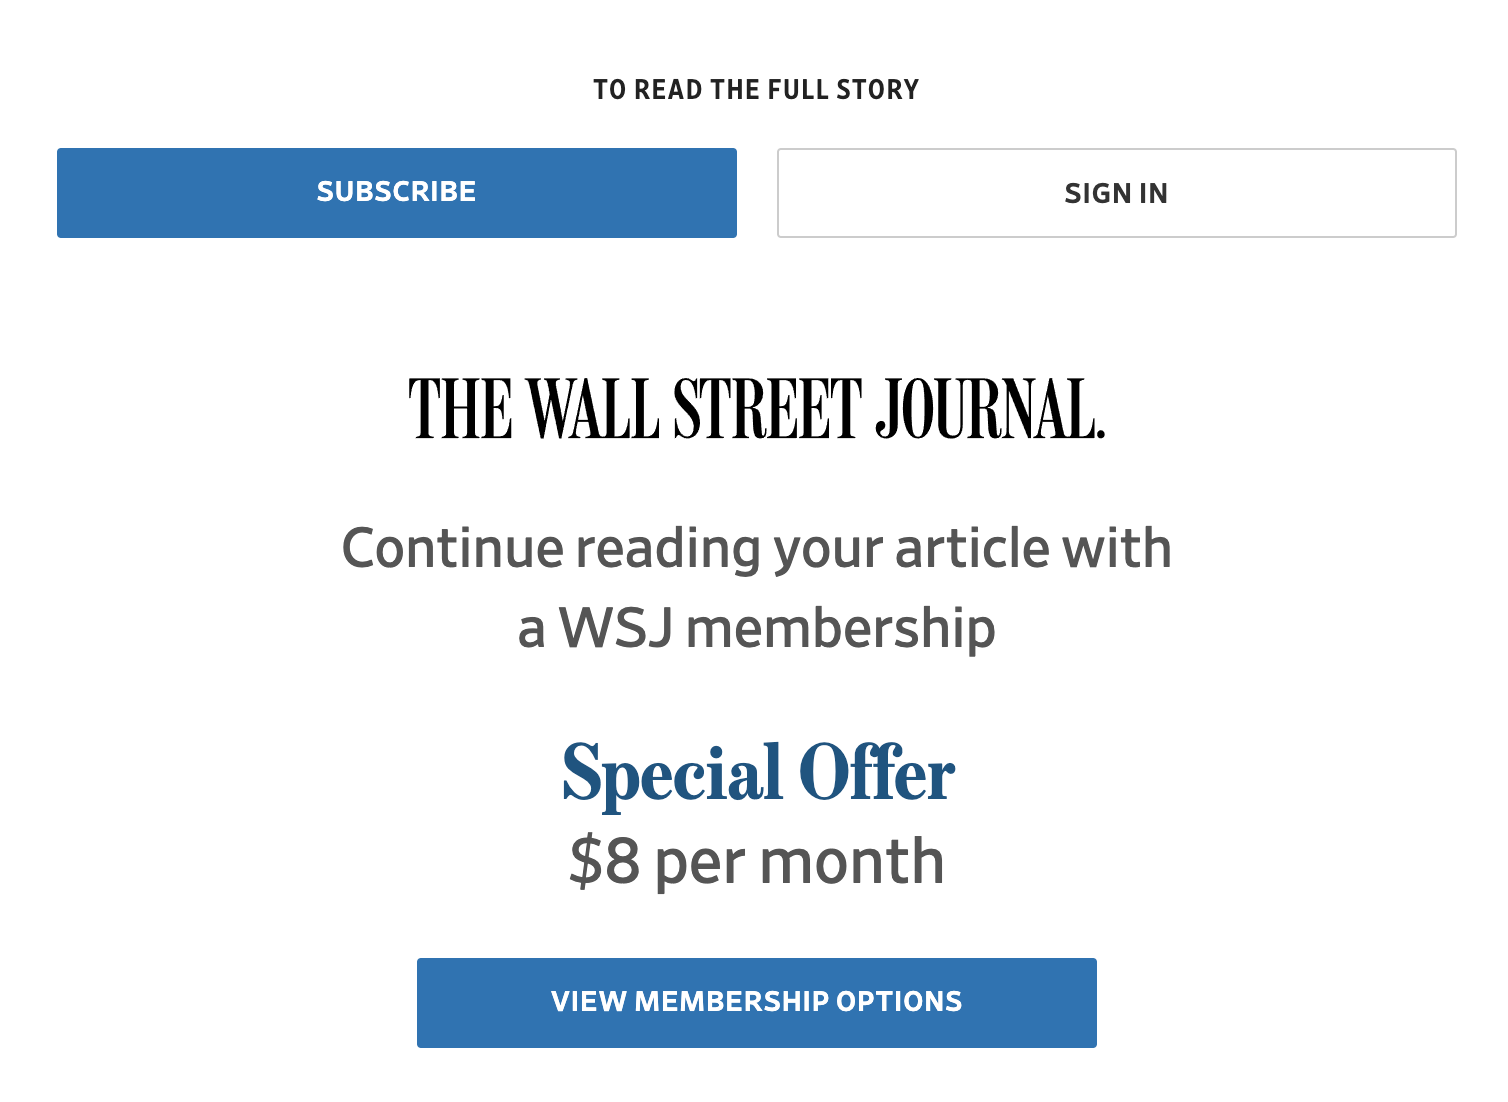 Wall Street Journal message says "Continue reading your article with a WSJ membership"